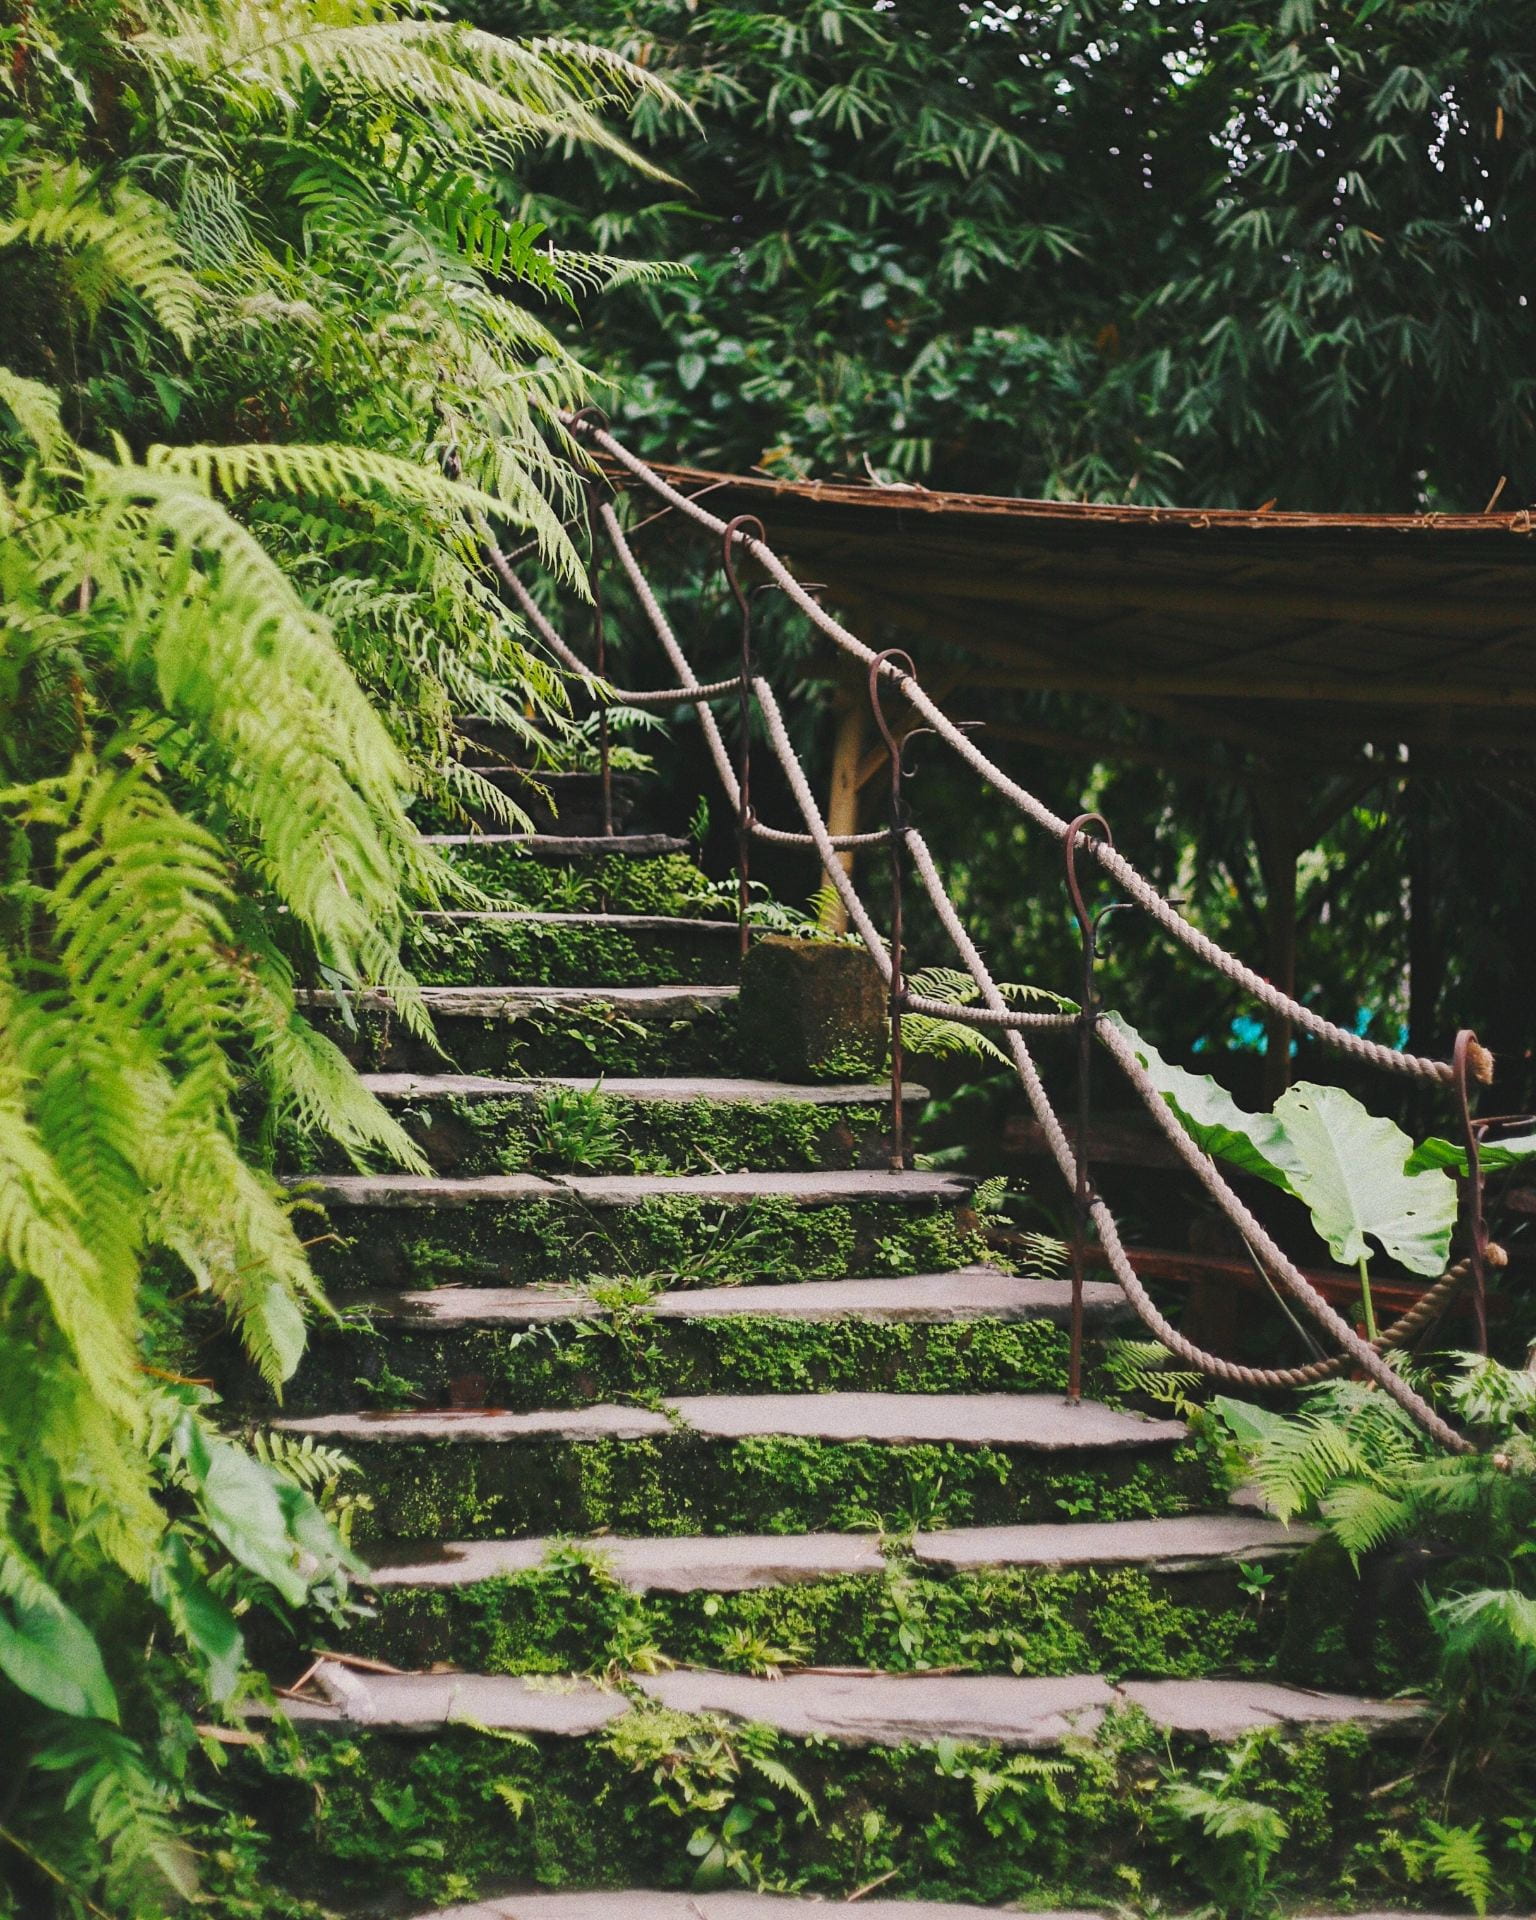 Outdoor staircase with foliage in Bambu Indah, Ubud, Indonesia